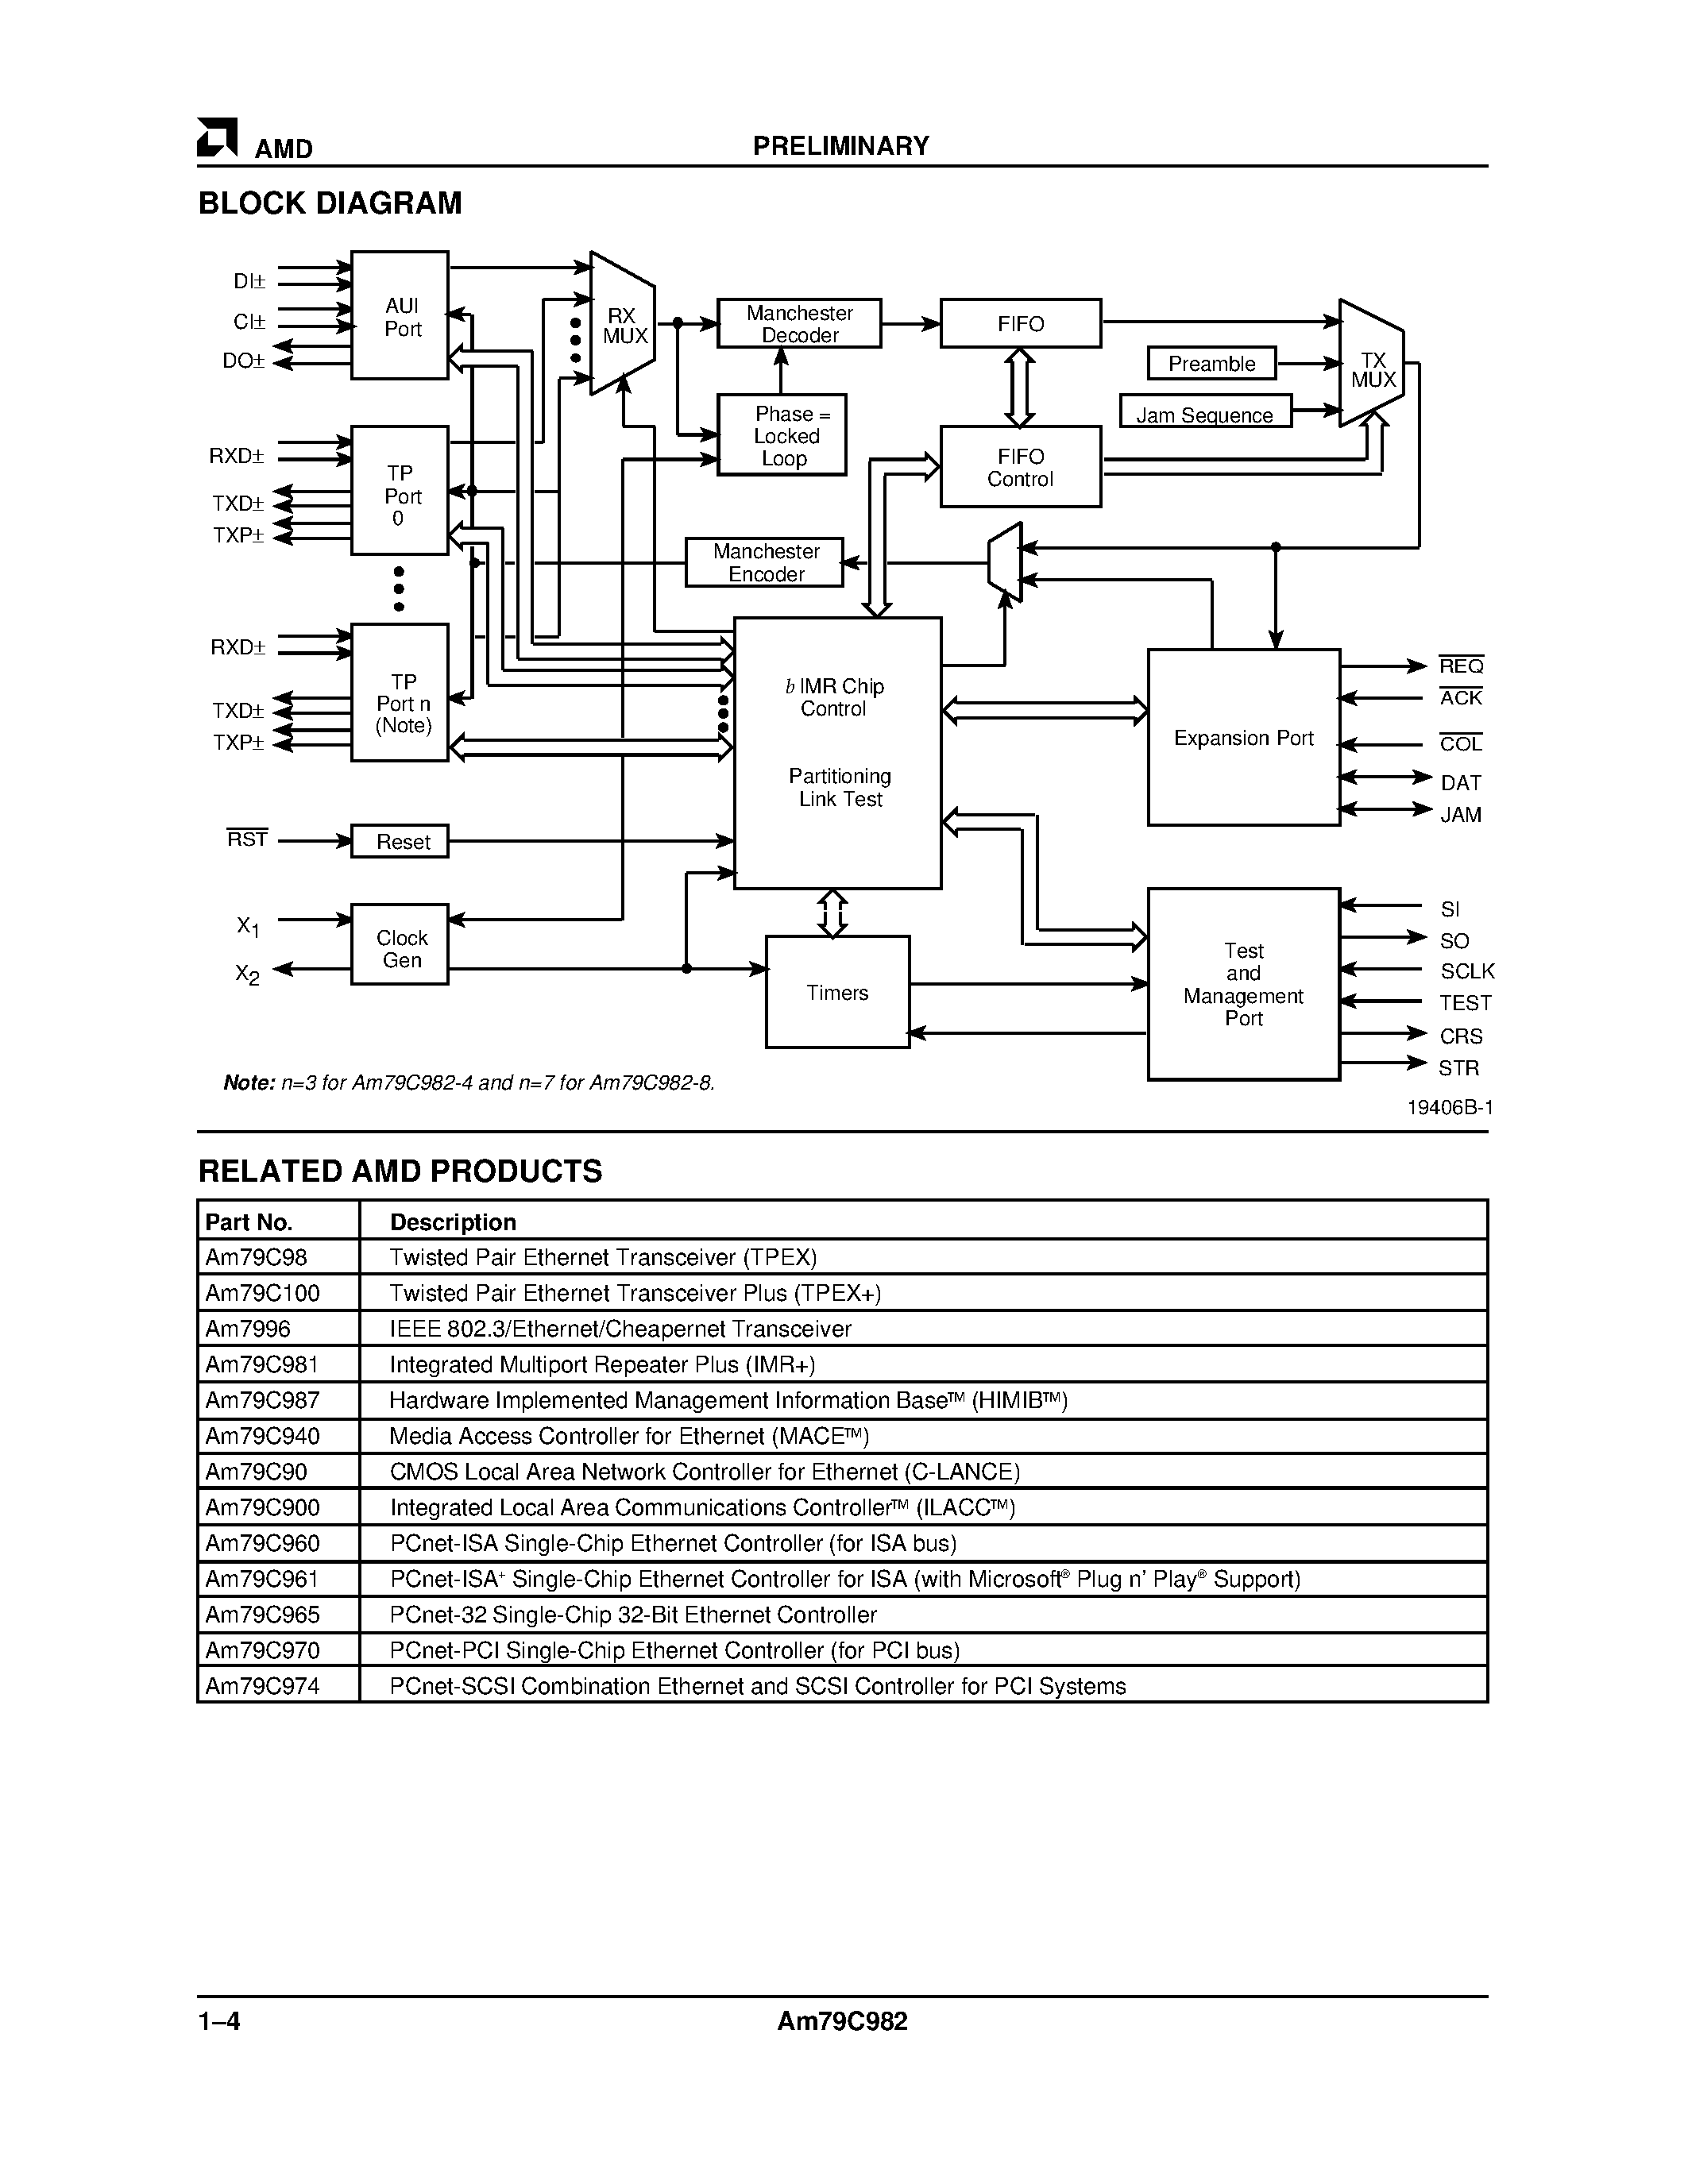 Datasheet AM79C982 - basic Integrated Multiport Repeater (bIMR) page 2